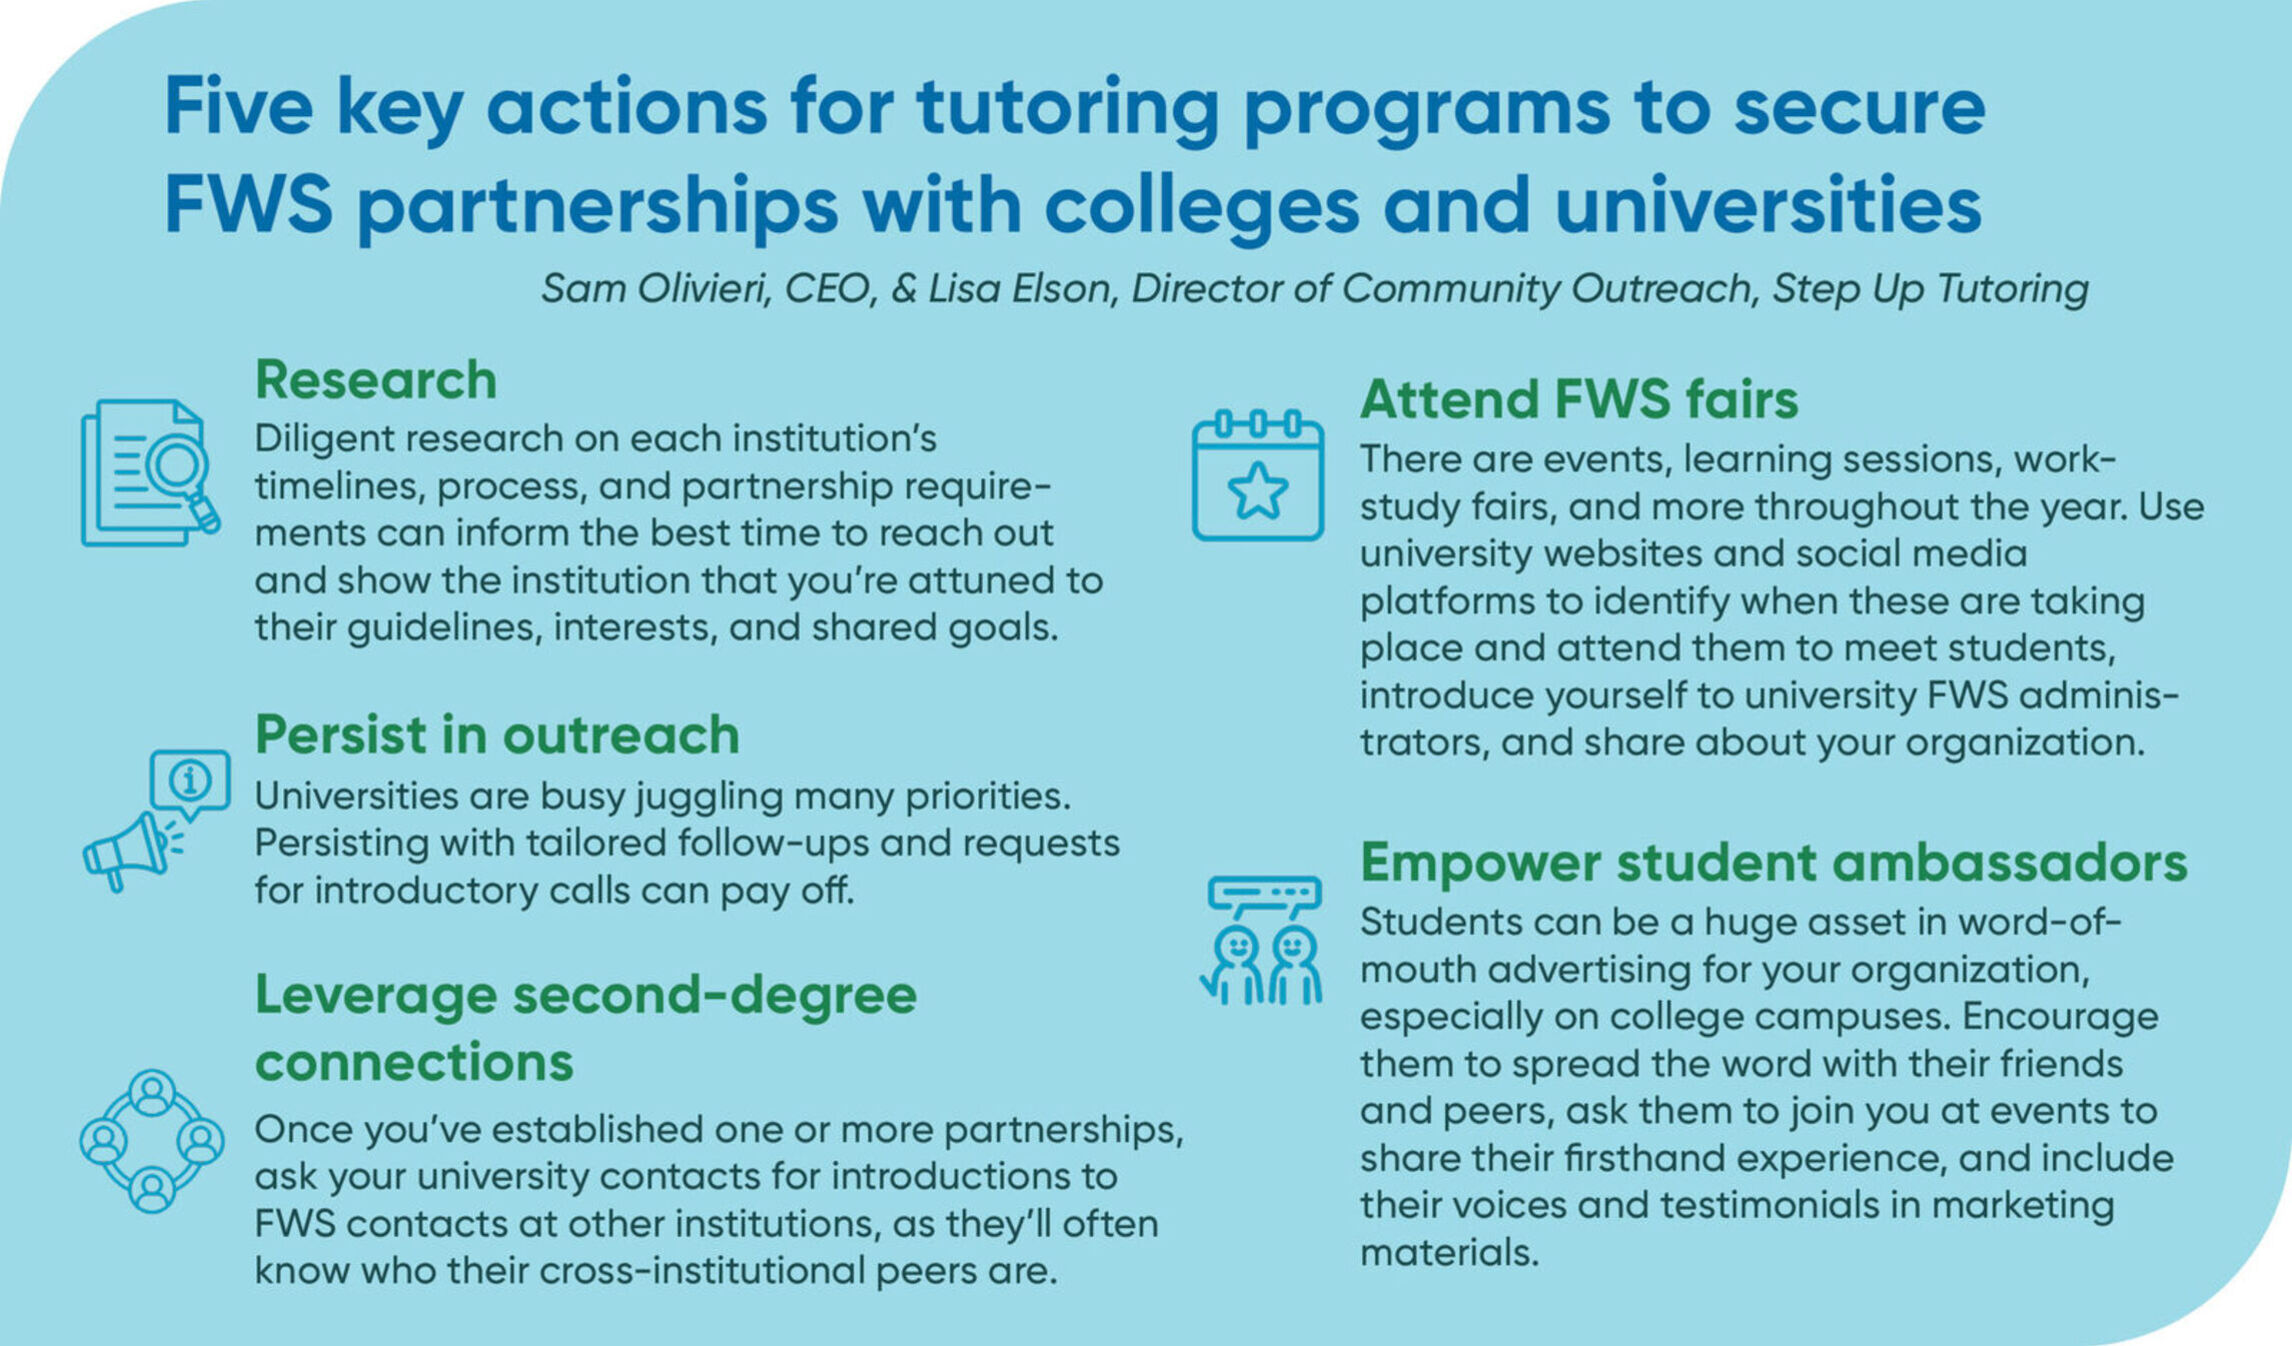 Five key actions for tutoring programs to secure FWS partnerships with colleges and universities. Credit: Sam Olivieri, CEO, & Lisa Elson, Director of Community Outreach, Step Up Tutoring. 1. Research: Diligent research on each institution’s timelines, process, and partnership requirements can inform the best time to reach out and show the institution that you’re attuned to their guidelines, interests, and shared goals. 2. Persist in outreach: Universities are busy juggling many priorities. Persisting with tailored follow-ups and requests for introductory calls can pay off. 3. Leverage second-degree connections. Once you’ve established one or more partnerships, ask your university contacts for introductions to FWS contacts at other institutions, as they’ll often know who their cross-institutional peers are. 4. Attend opportunities like FWS fairs. There are events, learning sessions, work-study fairs, and more throughout the year. Use university websites and social media platforms to identify when these are taking place and attend them to meet students, introduce yourself to university FWS administrators, and share about your organization. 5. Empower students as ambassadors. Students can be a huge asset in word-of-mouth advertising for your organization, especially on college campuses. Encourage them to spread the word with their friends and peers, ask them to join you at events to share their firsthand experience, and include their voices and testimonials in marketing materials.